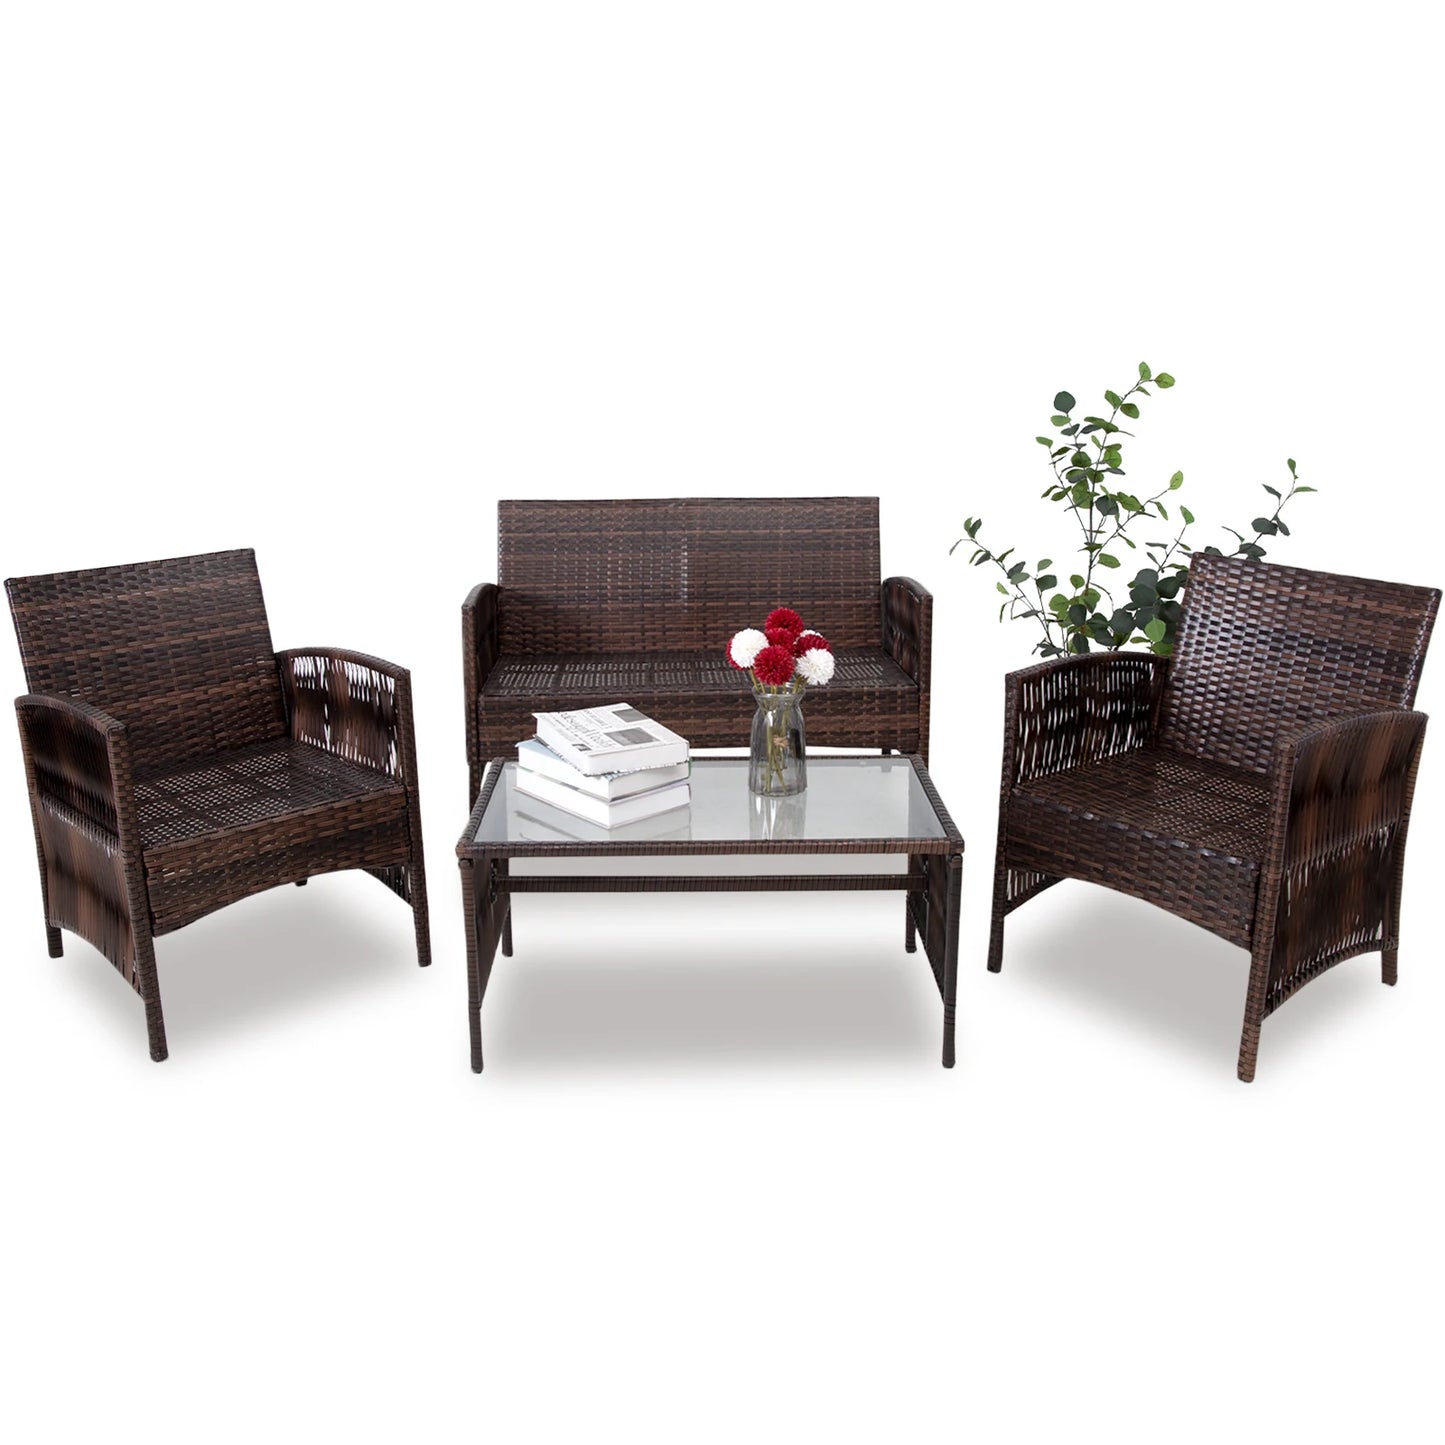 Patio Furniture Set 4 Pieces Outdoor Wicker Rattan Chairs And Loveseat